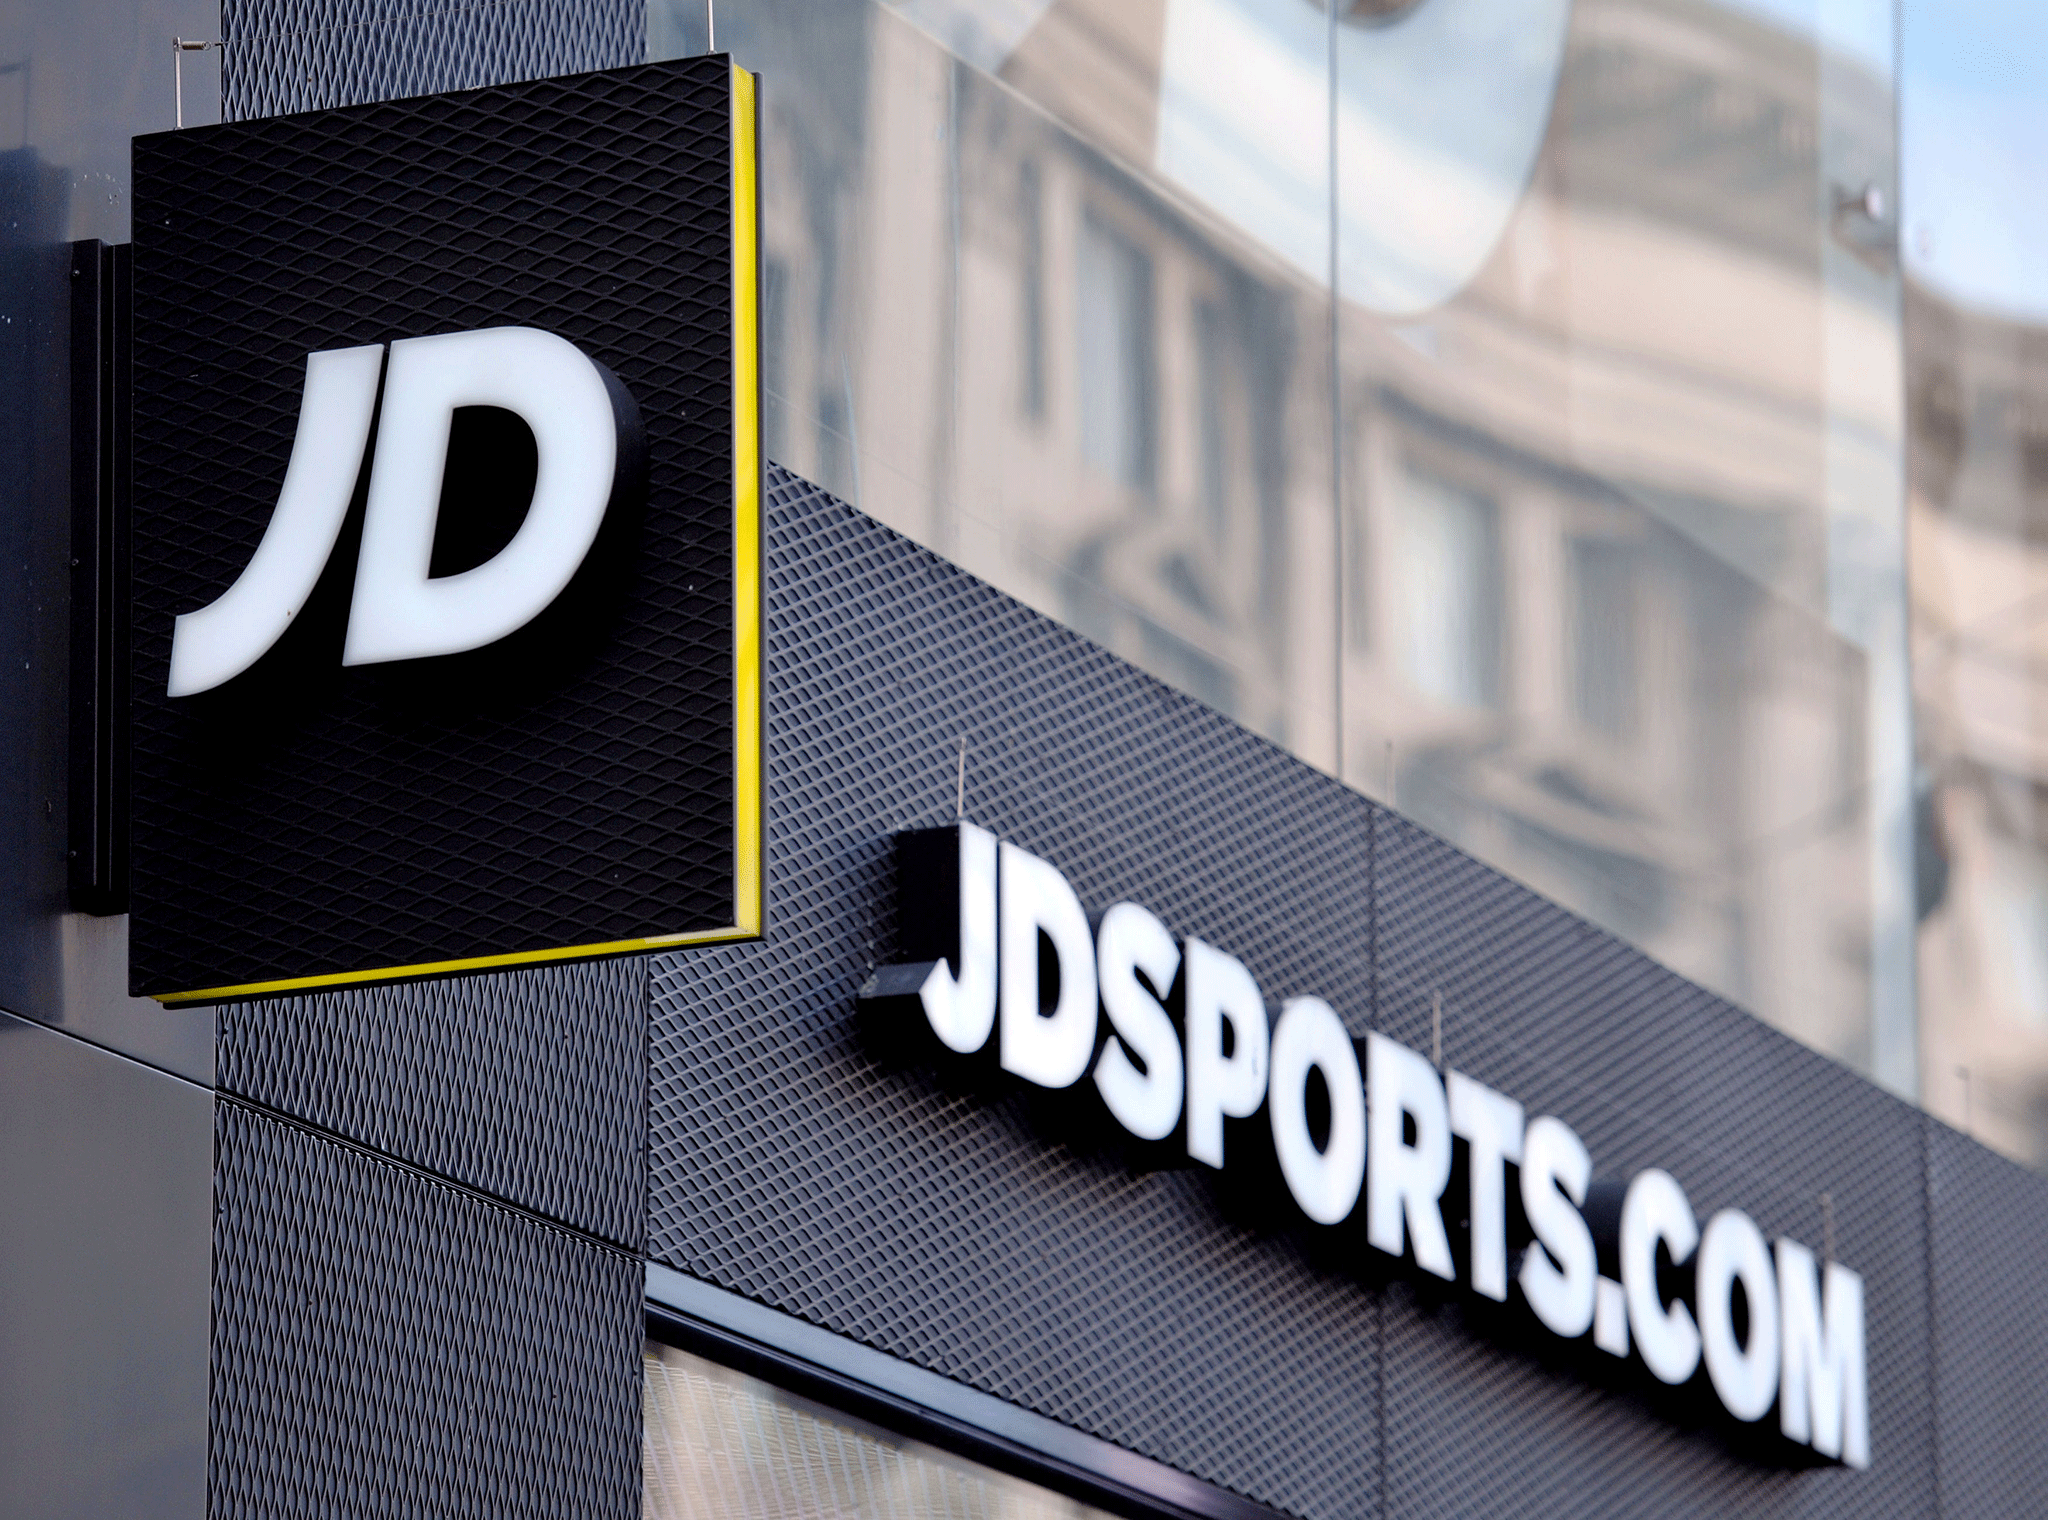 JD Sports shrugs off Brexit to report a more than 80% jump in profit